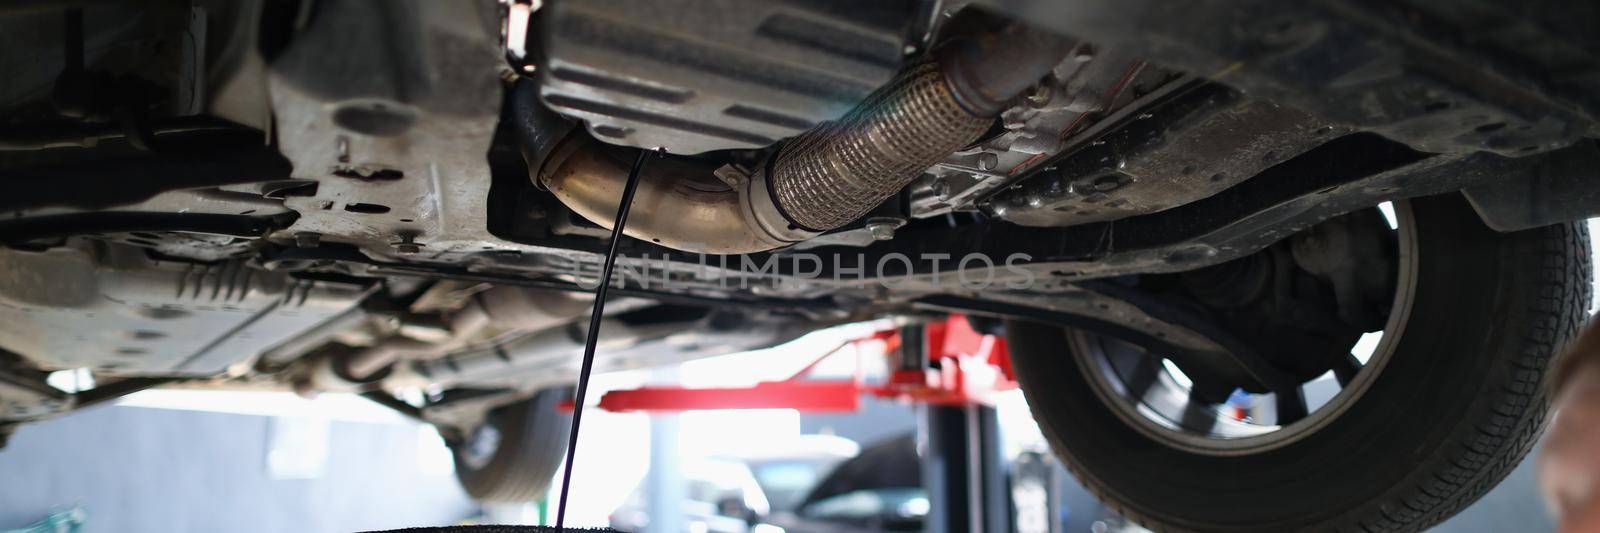 Close-up of automobile lifted in air dripping oil in container, worker control process. Professional car maintenance in service centre. Pit stop concept